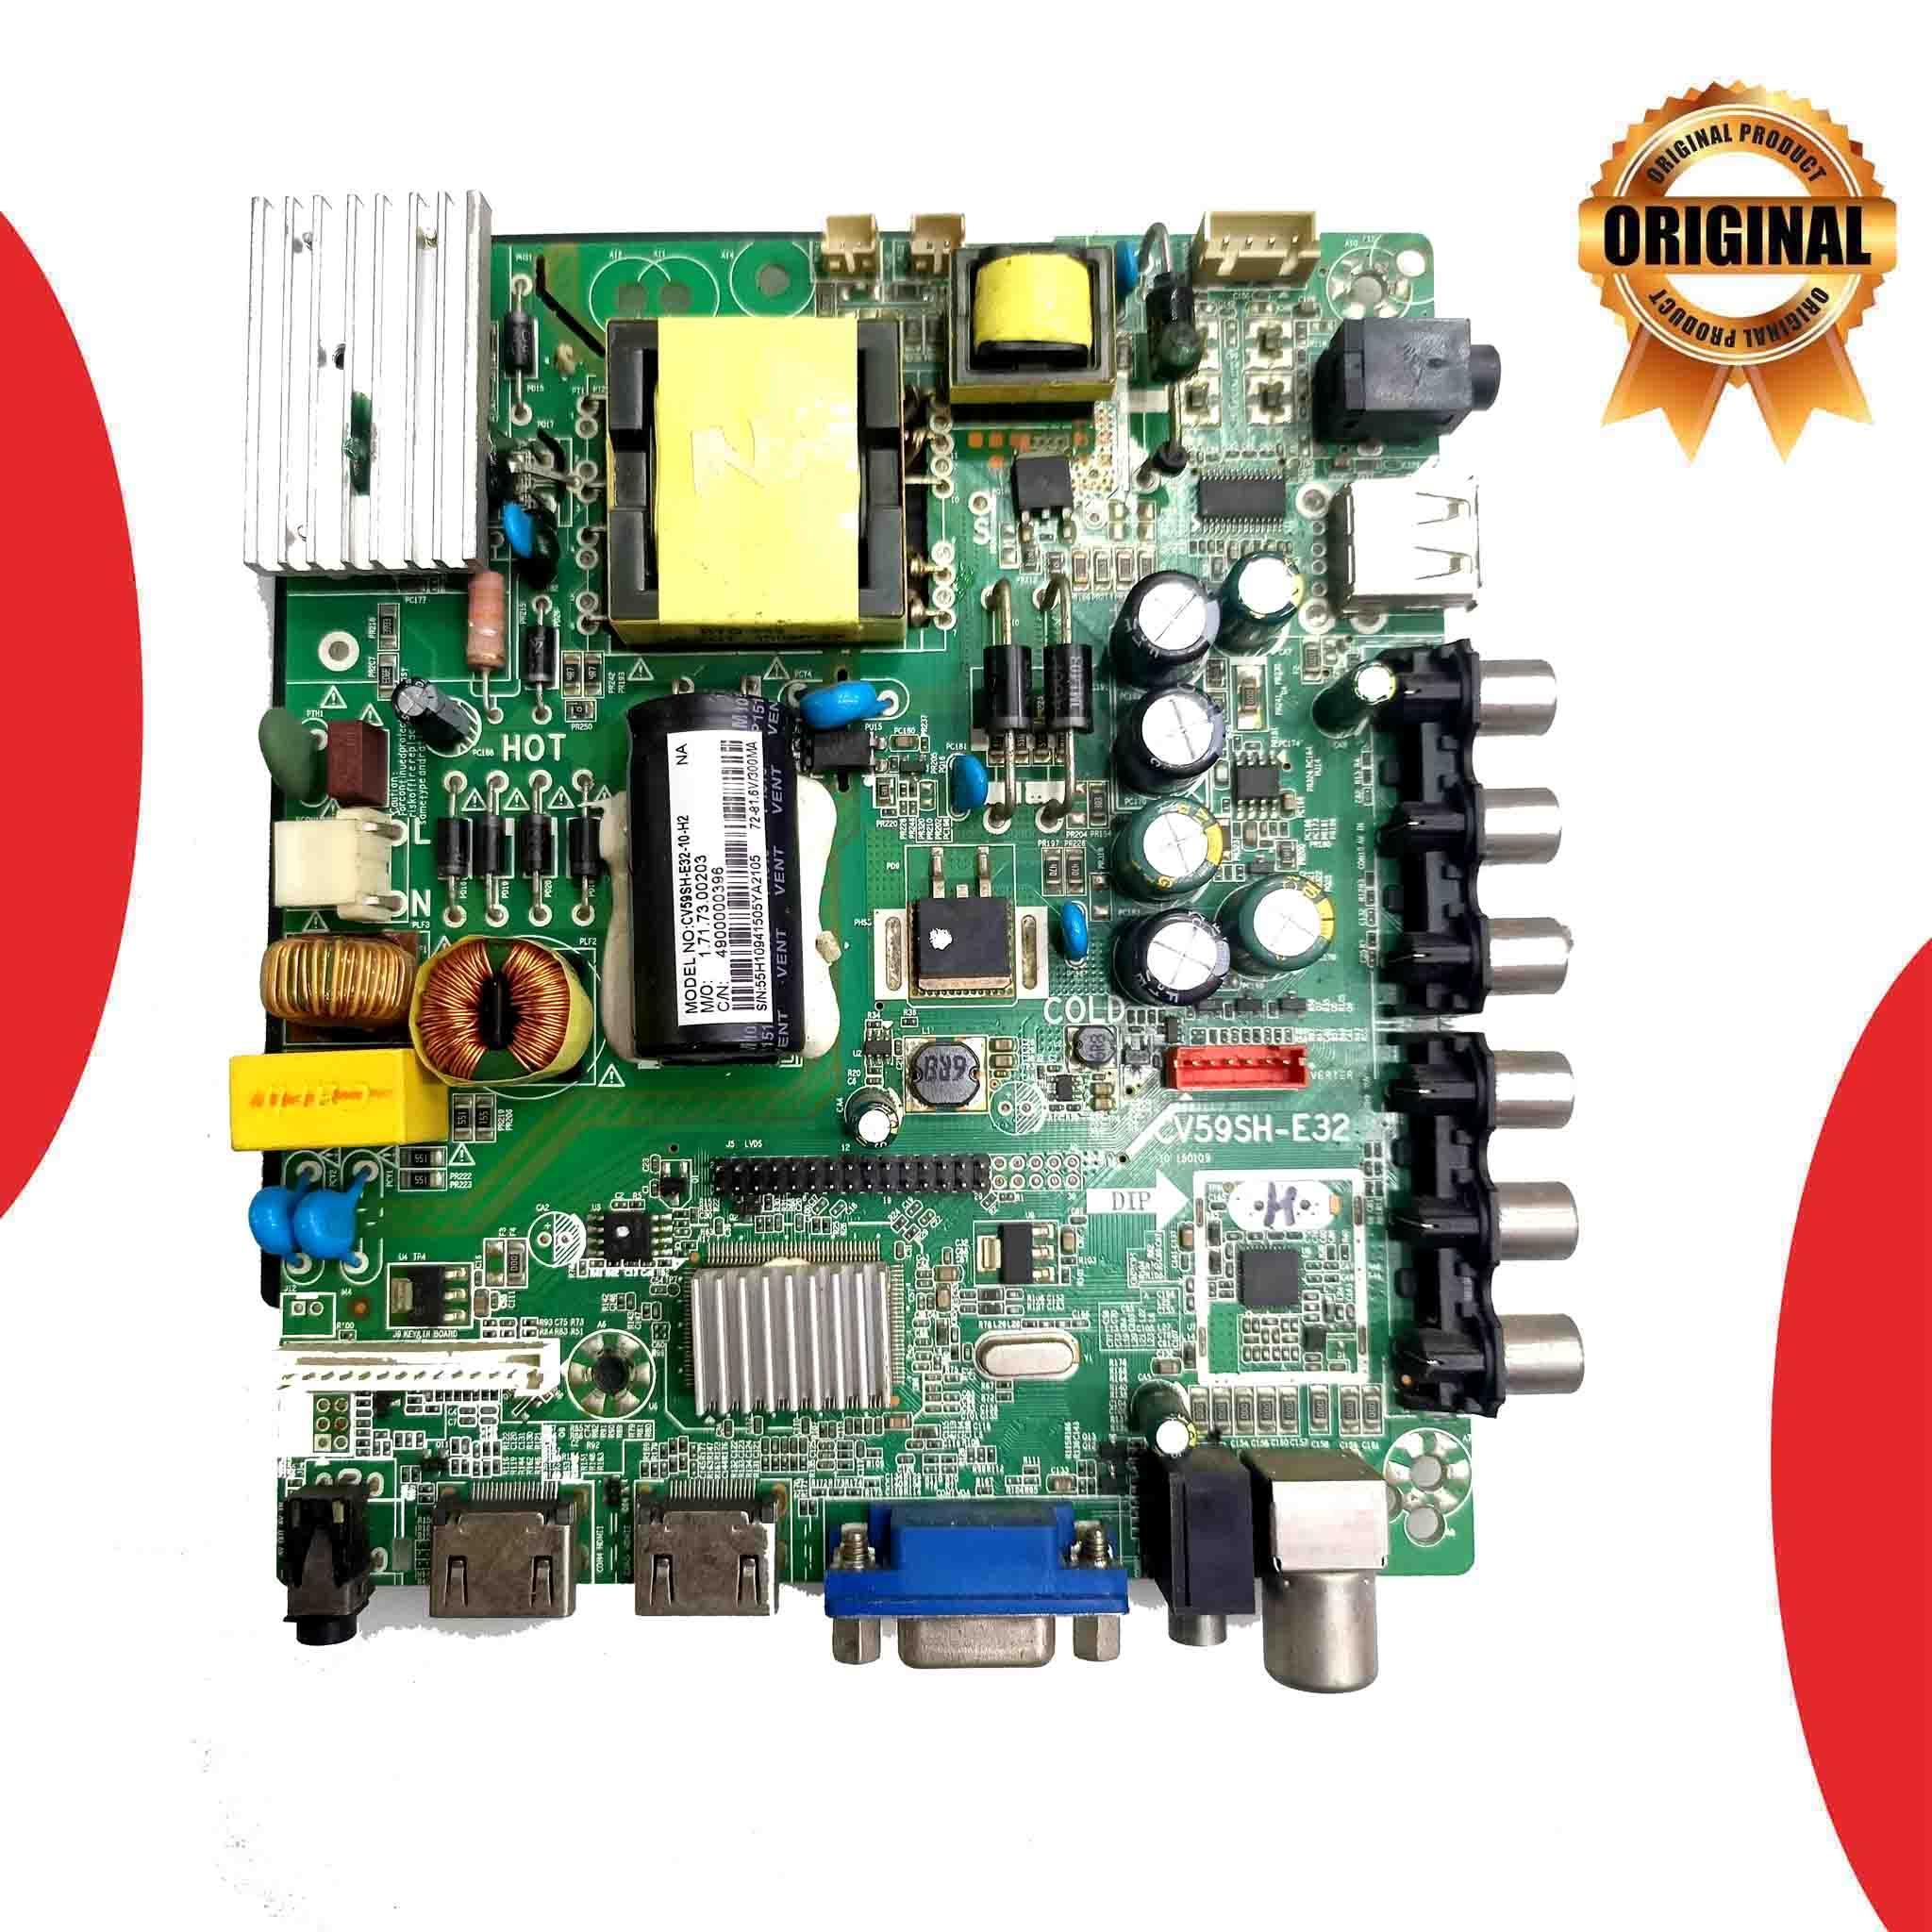 Micromax 32 inch LED TV Motherboard for Model 32B200HD - Great Bharat Electronics